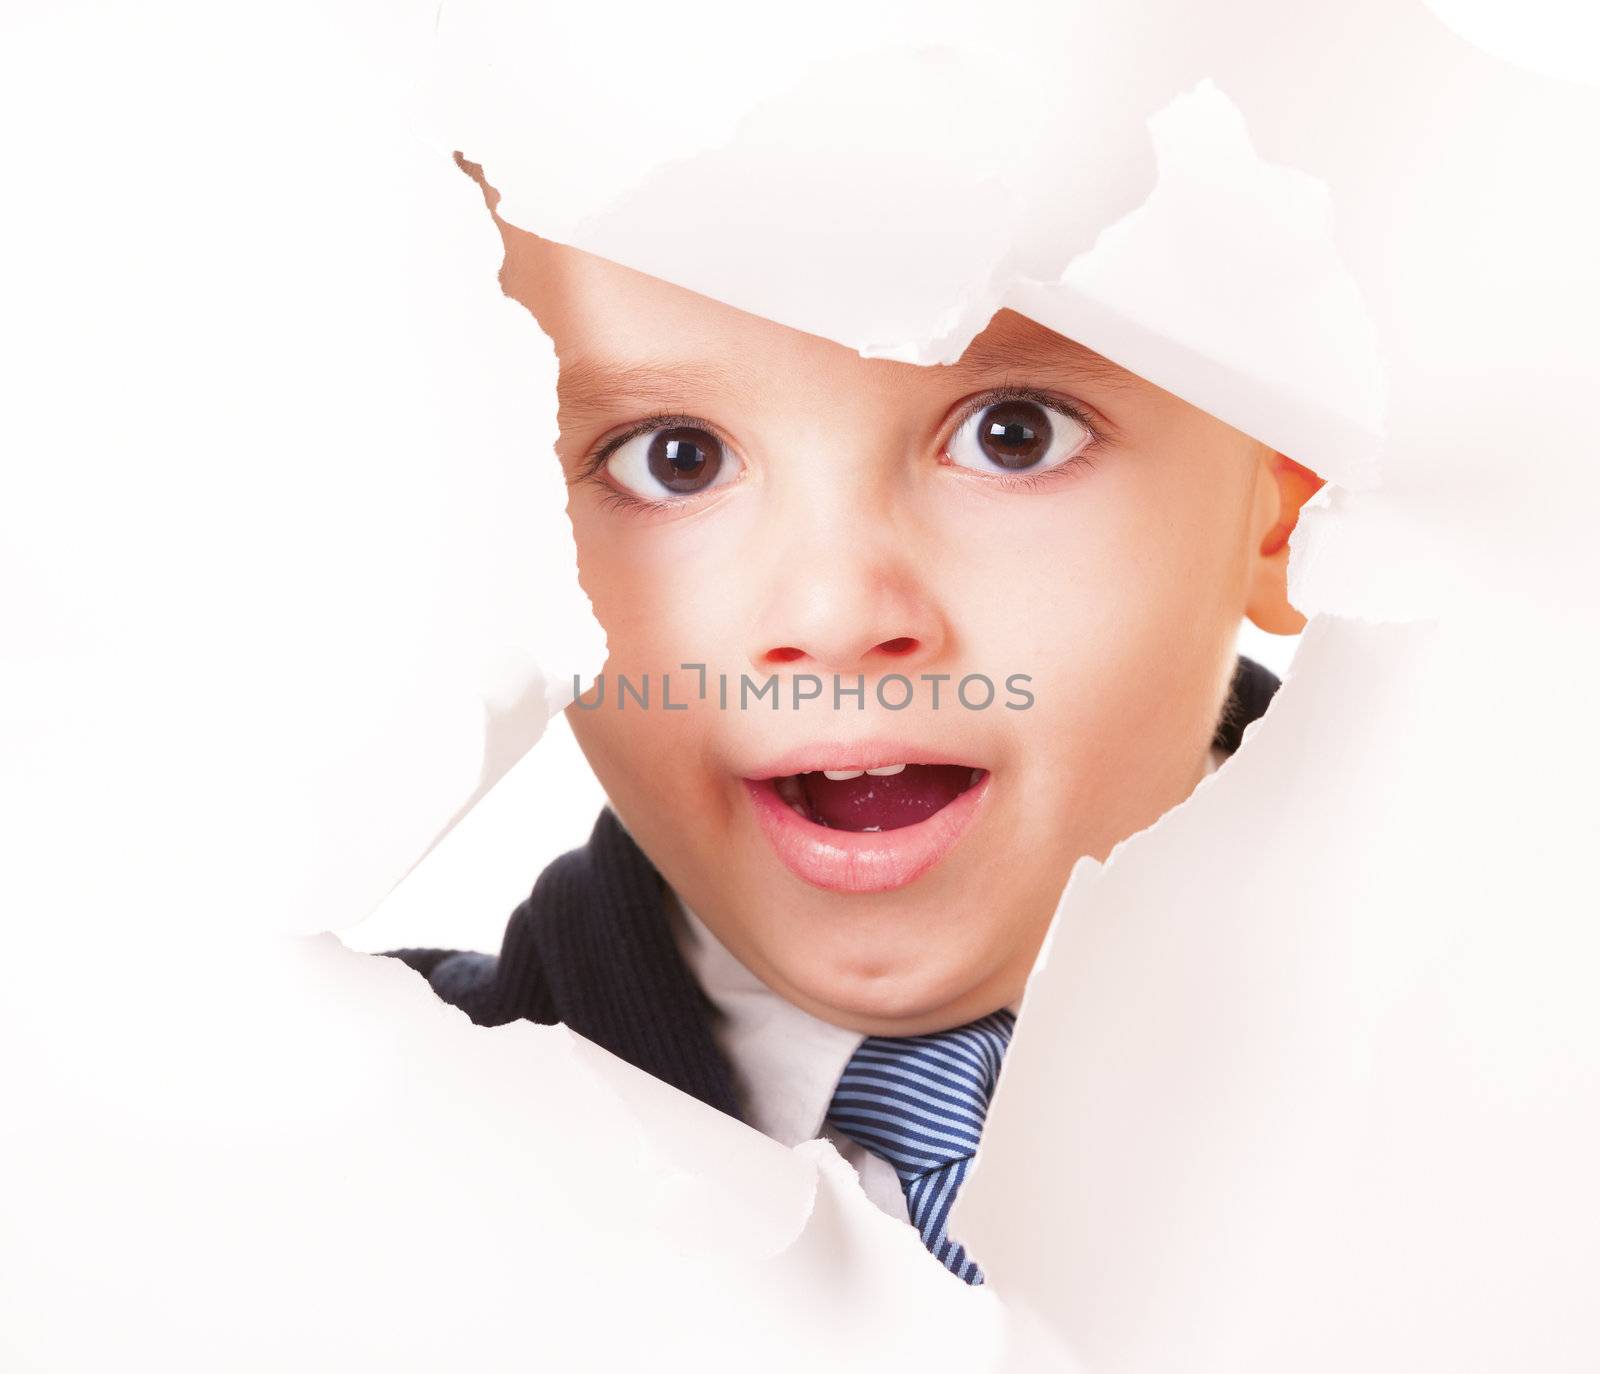 Yawning kid looks up through a hole in white paper